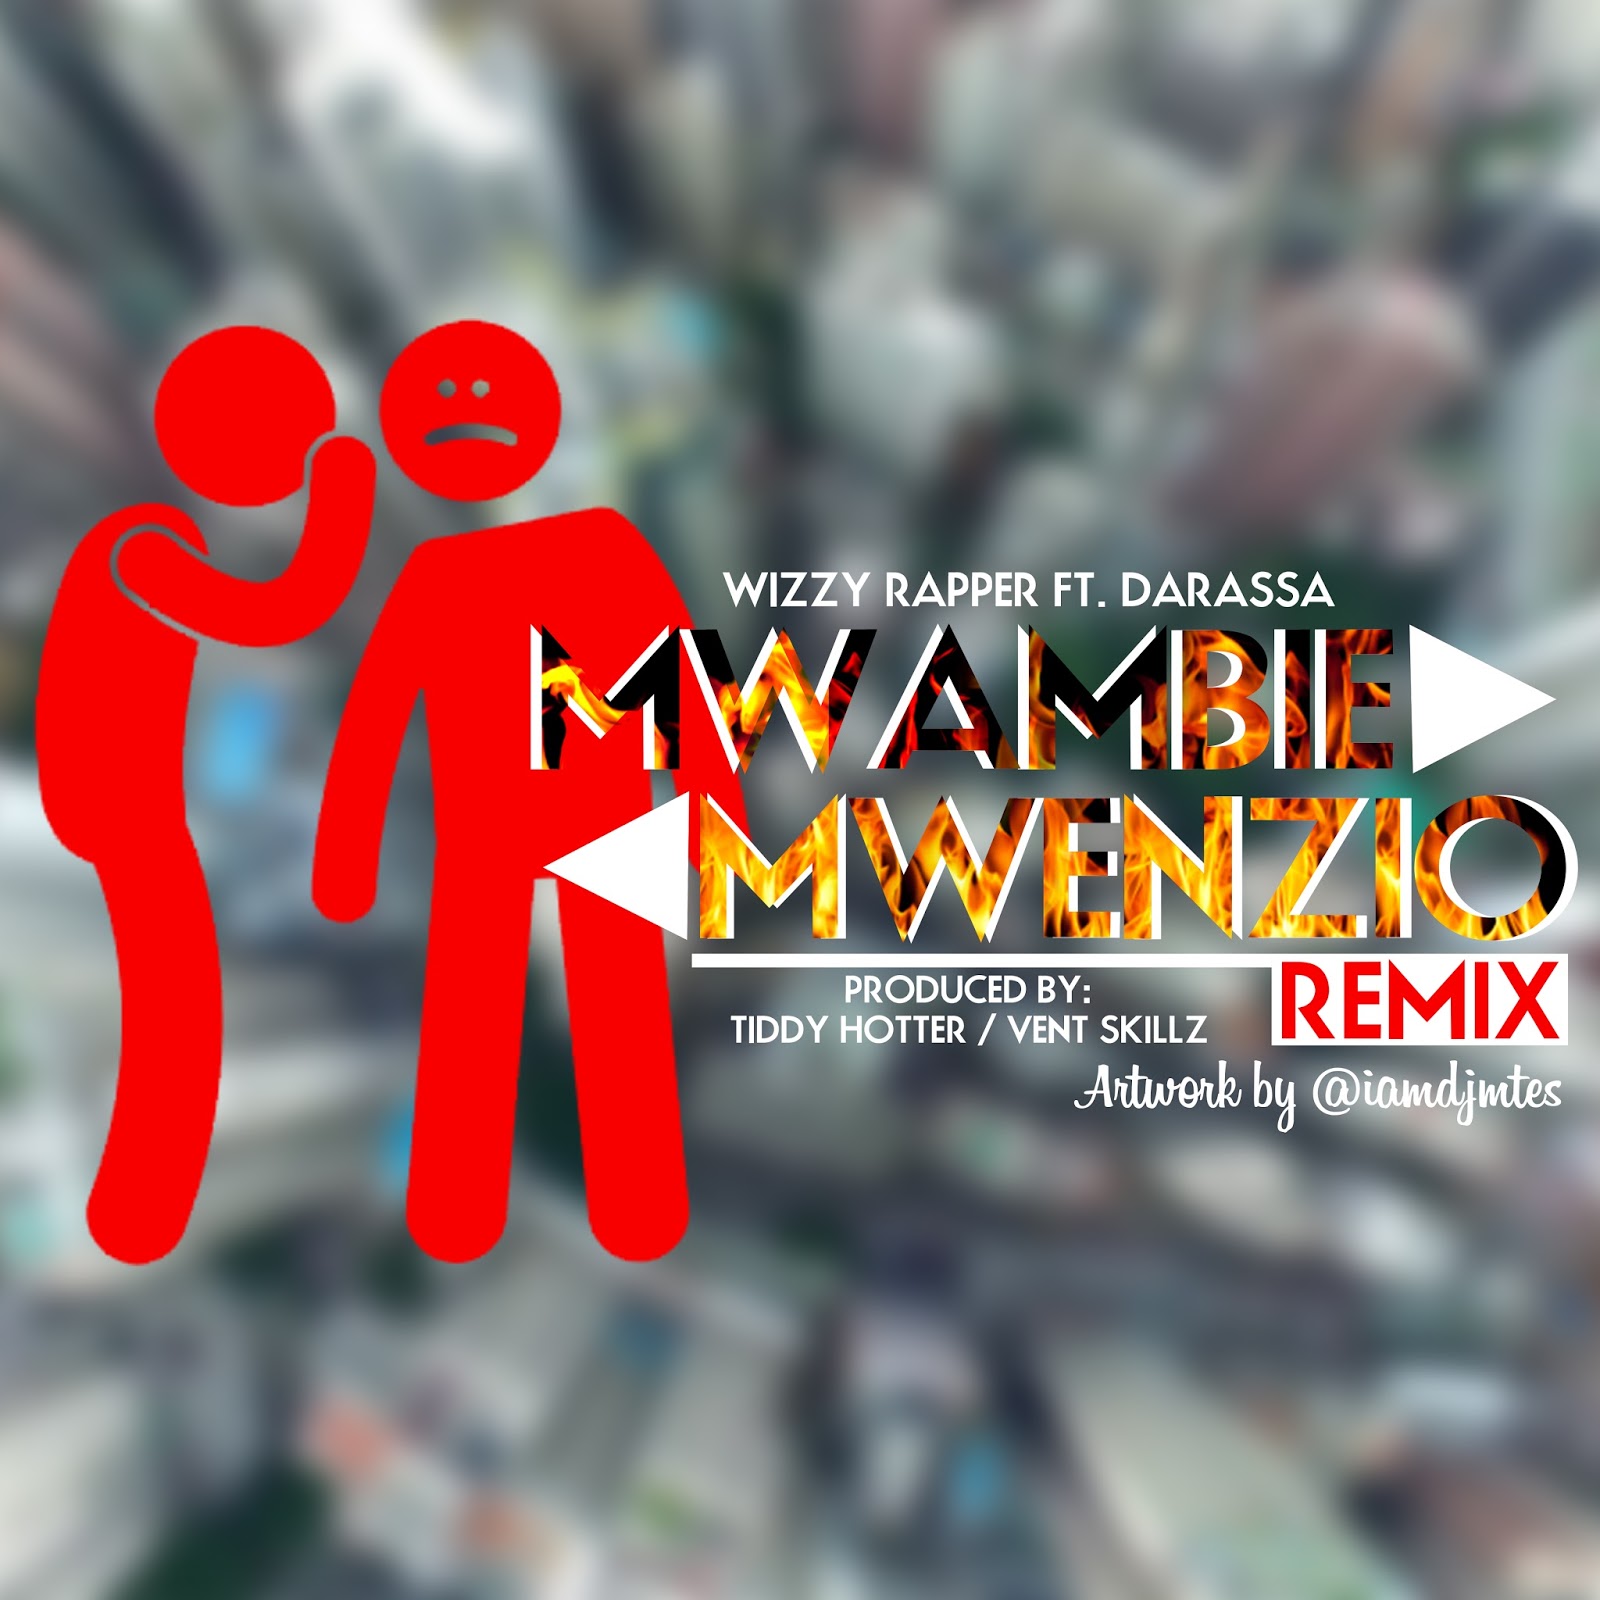 New AUDIO | Wizzy Rapper Ft. Darassa – Mwambie Mwenzio (Remix) | Download<br />
<b>Deprecated</b>:  strip_tags(): Passing null to parameter #1 ($string) of type string is deprecated in <b>/home/djmwanga/public_html/wp-content/themes/Newsmag/loop-single.php</b> on line <b>60</b><br />
